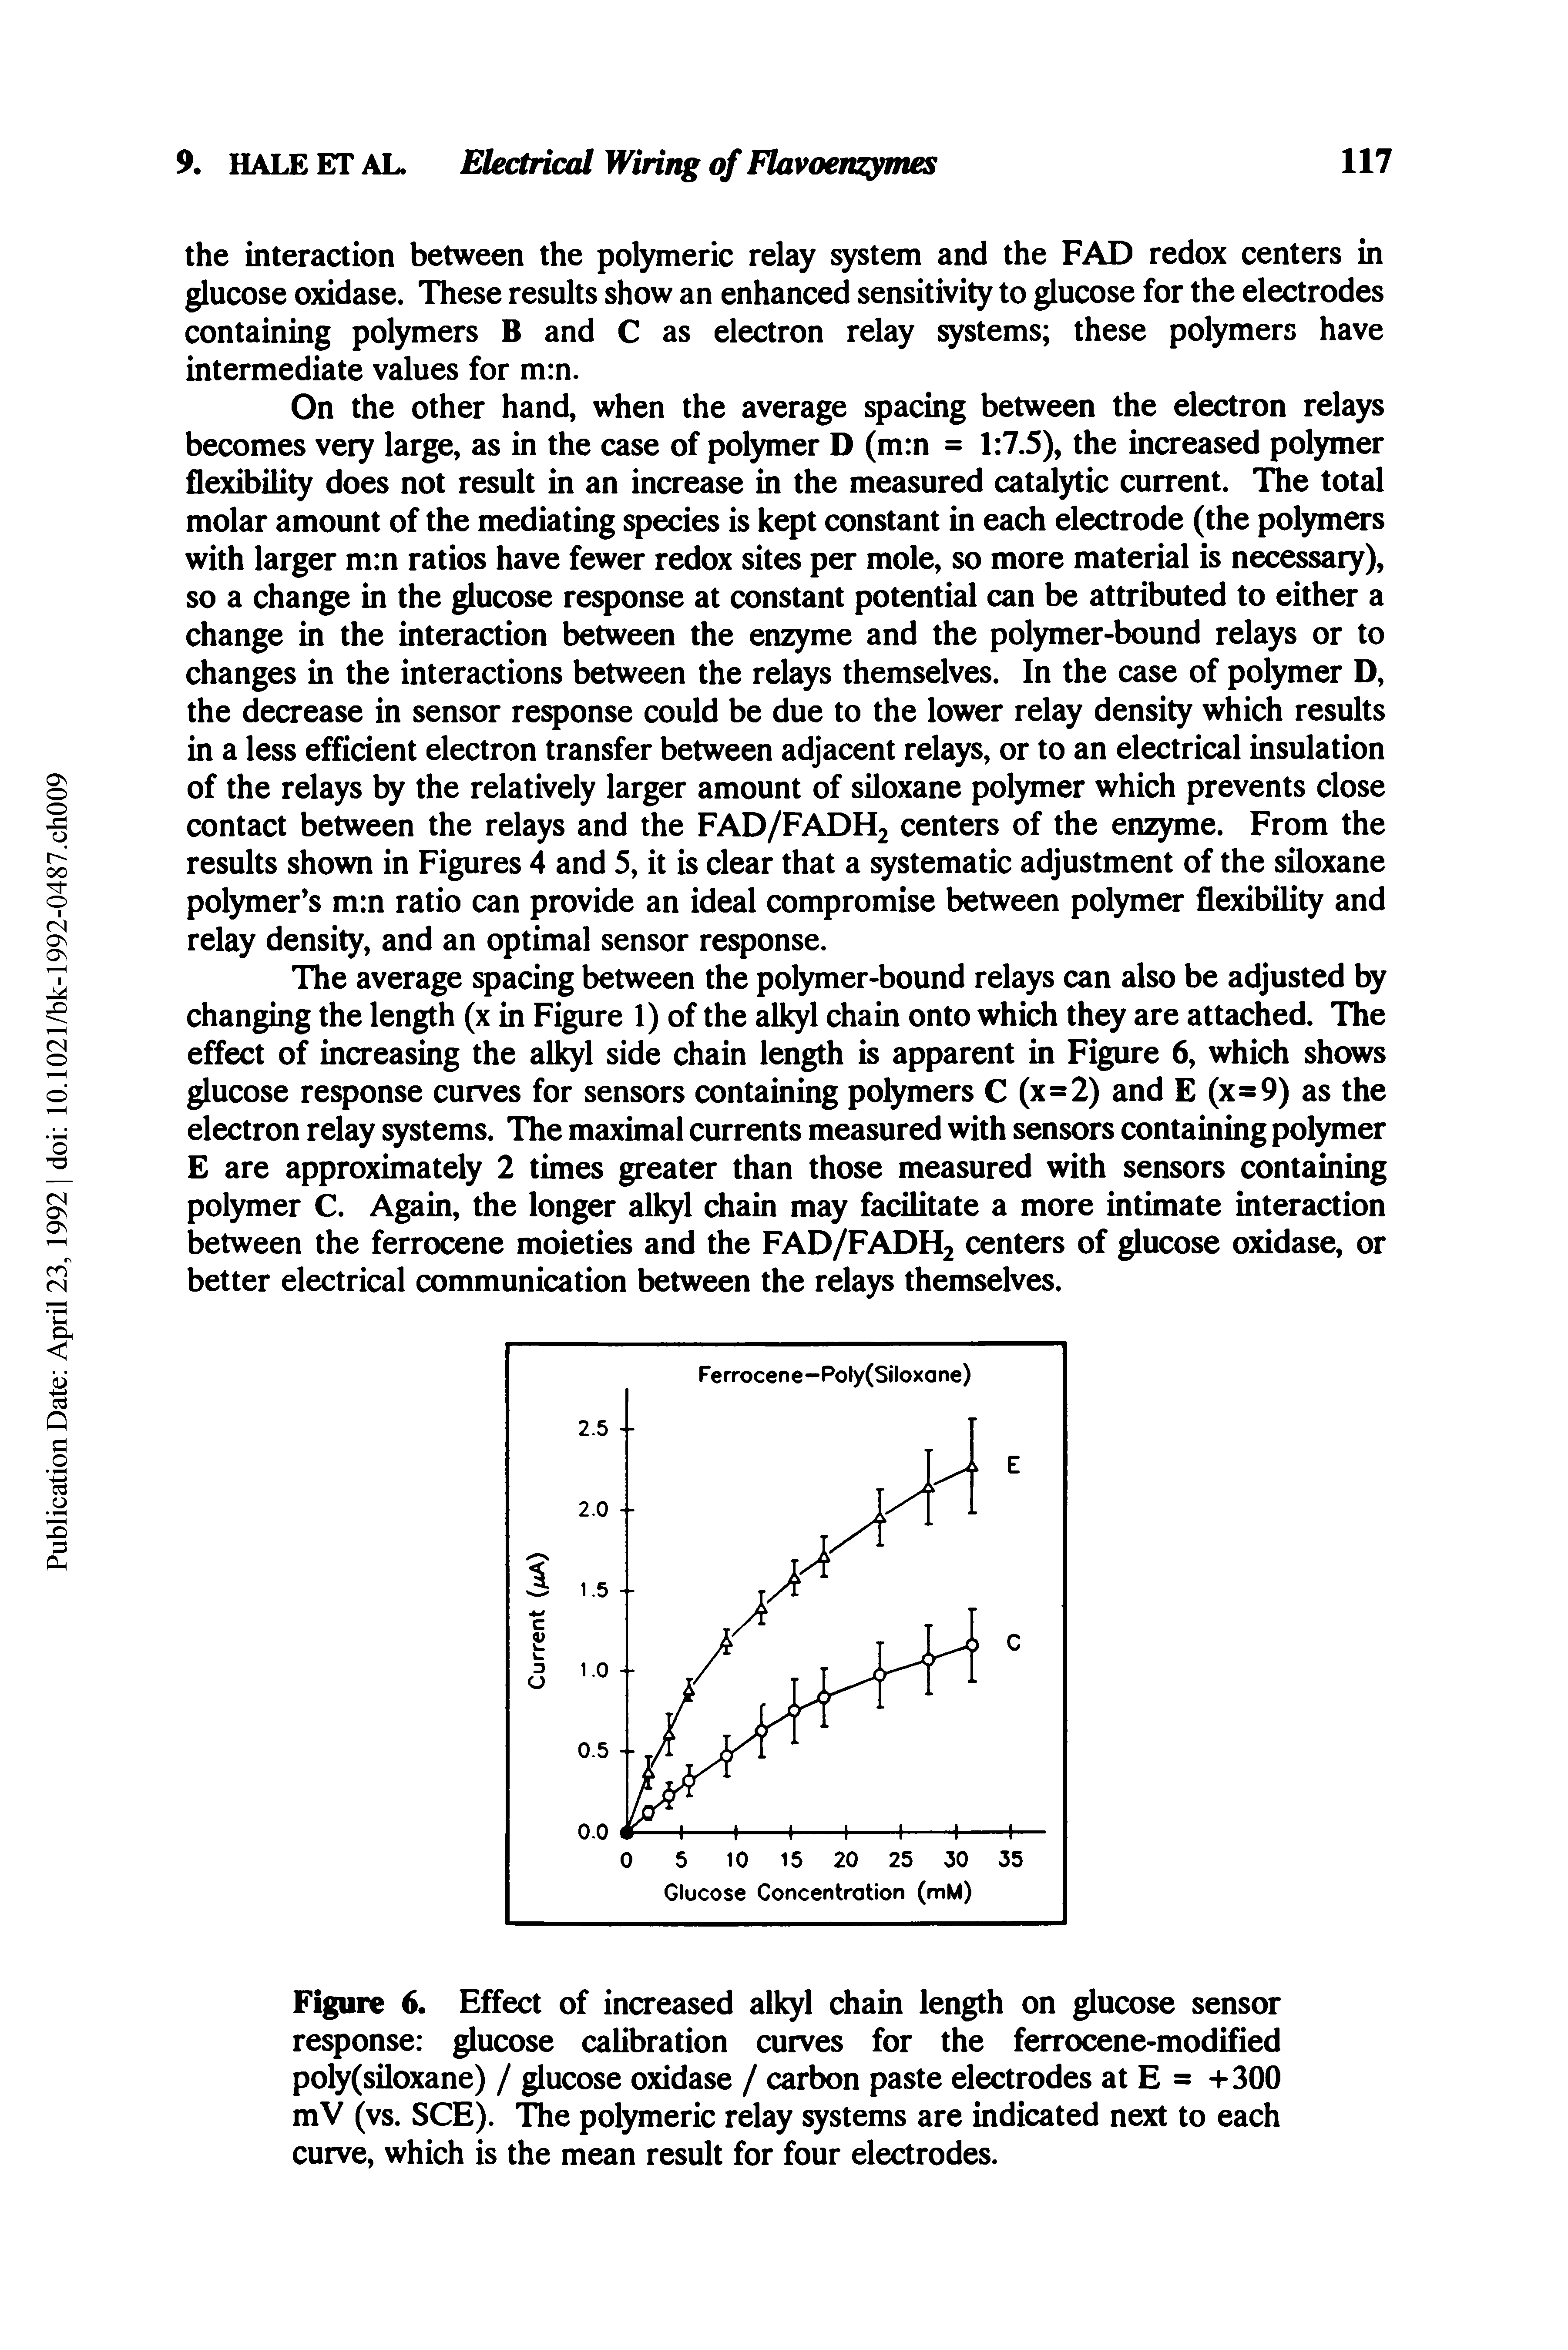 Figure 6. Effect of increased alkyl chain length on glucose sensor response glucose calibration curves for the ferrocene-modified poly(siloxane) / glucose oxidase / carbon paste electrodes at E = +300 mV (vs. SCE). The polymeric relay systems are indicated next to each curve, which is the mean result for four electrodes.